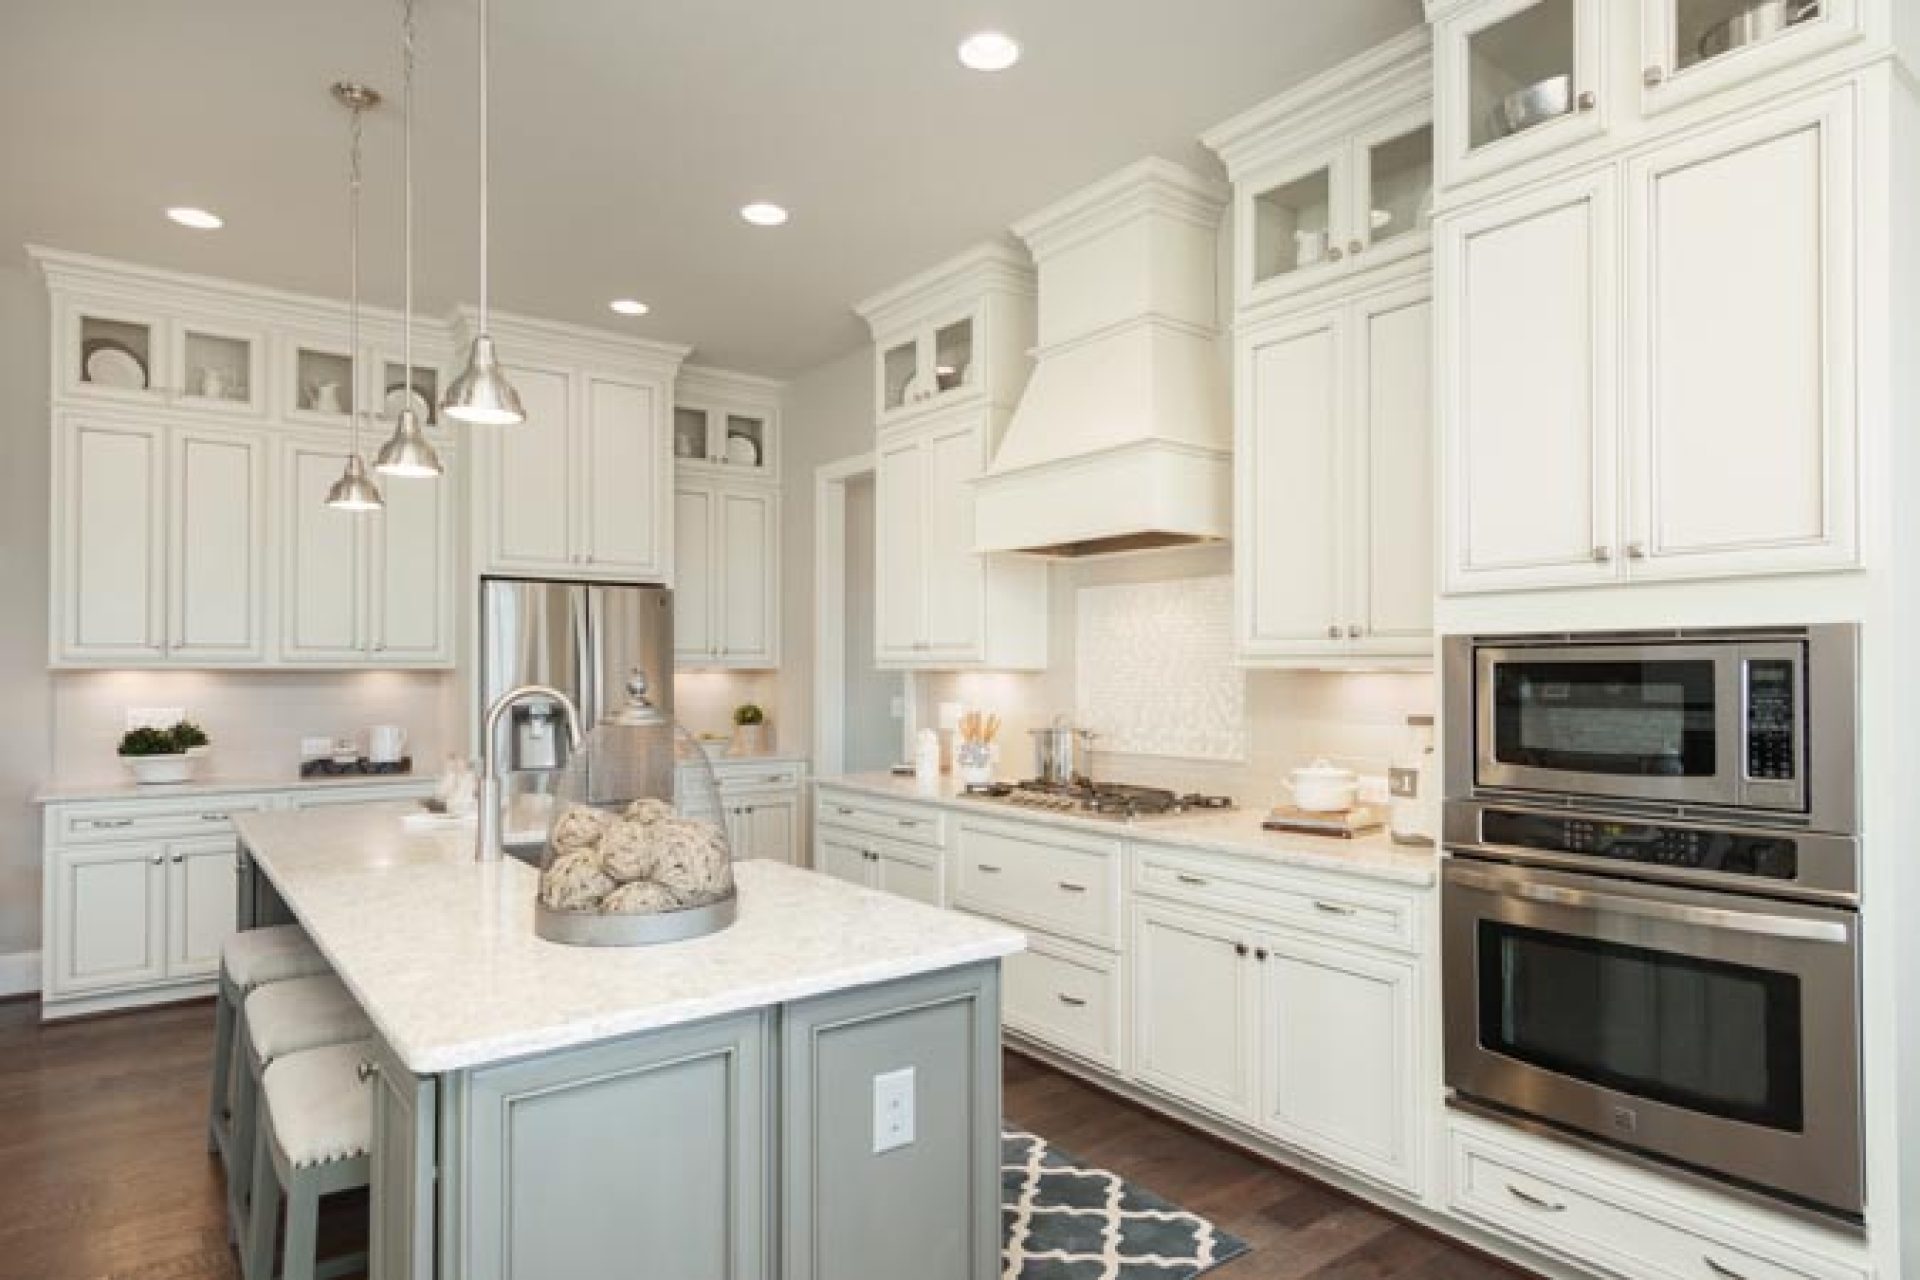 New Homes in Apex, NC | Bridlewood at Friendship Place | HHHunt Homes